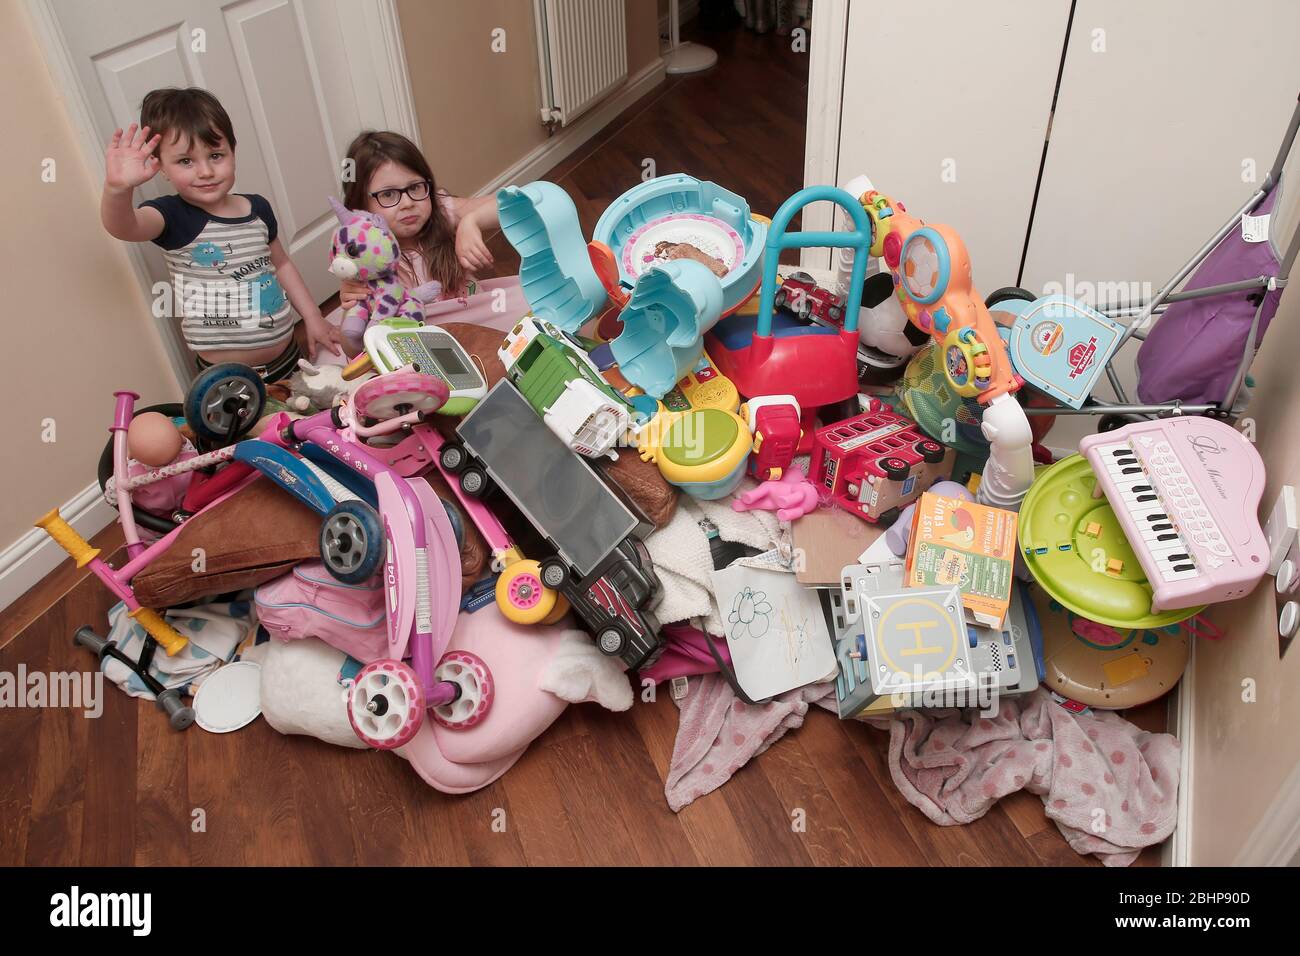 Two siblings surrounded by huge pile of children's toys at home Stock Photo